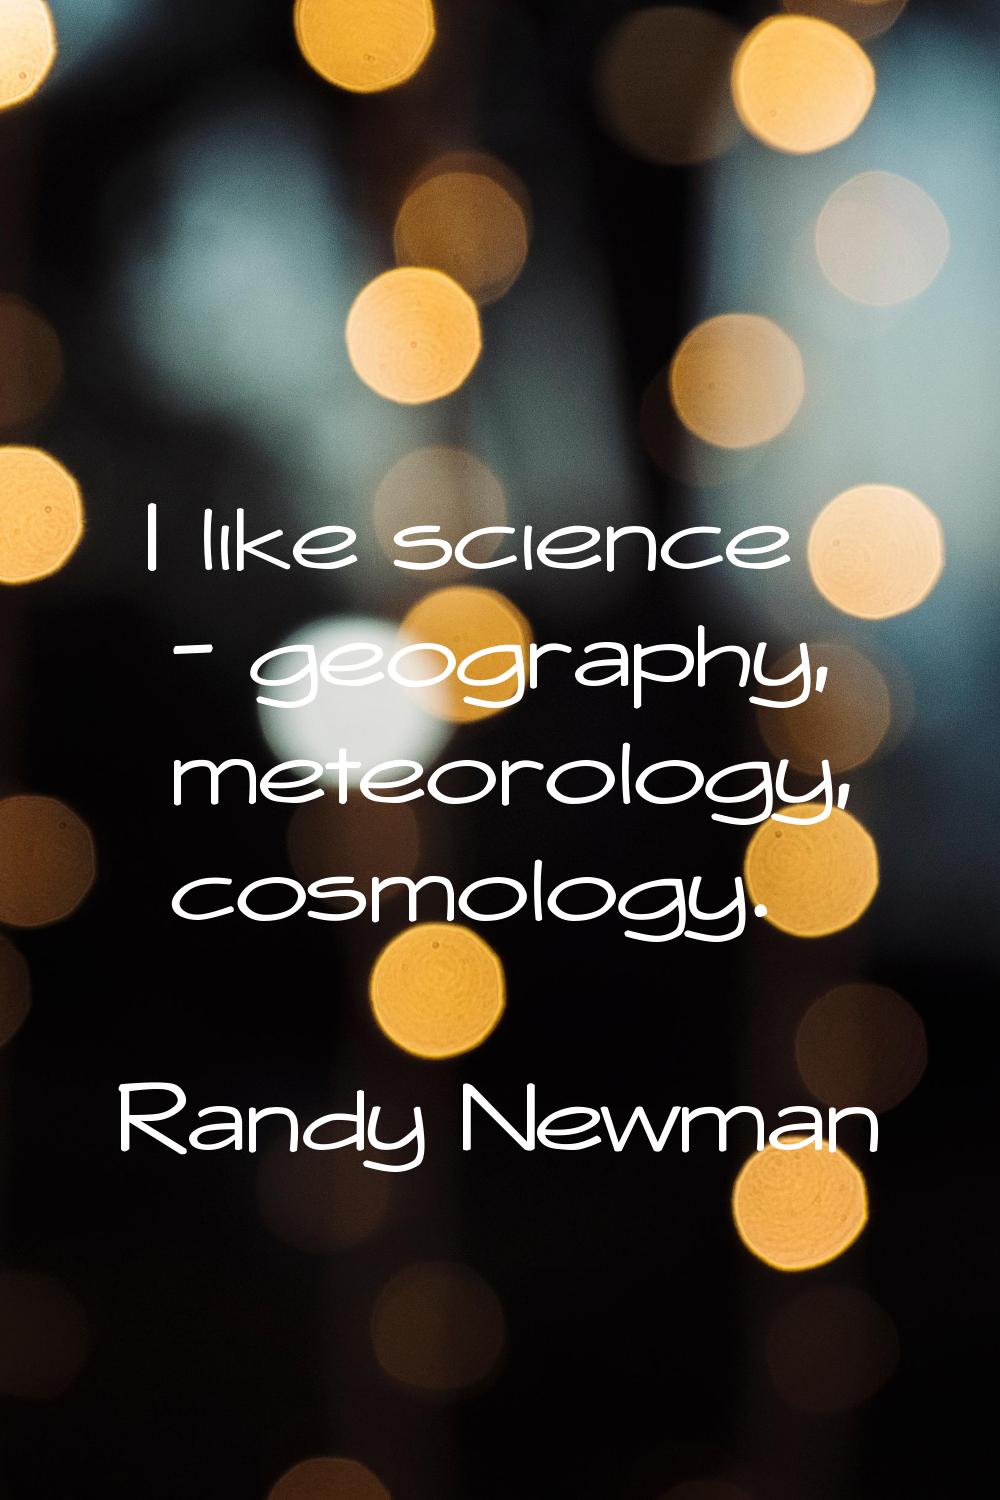 I like science - geography, meteorology, cosmology.